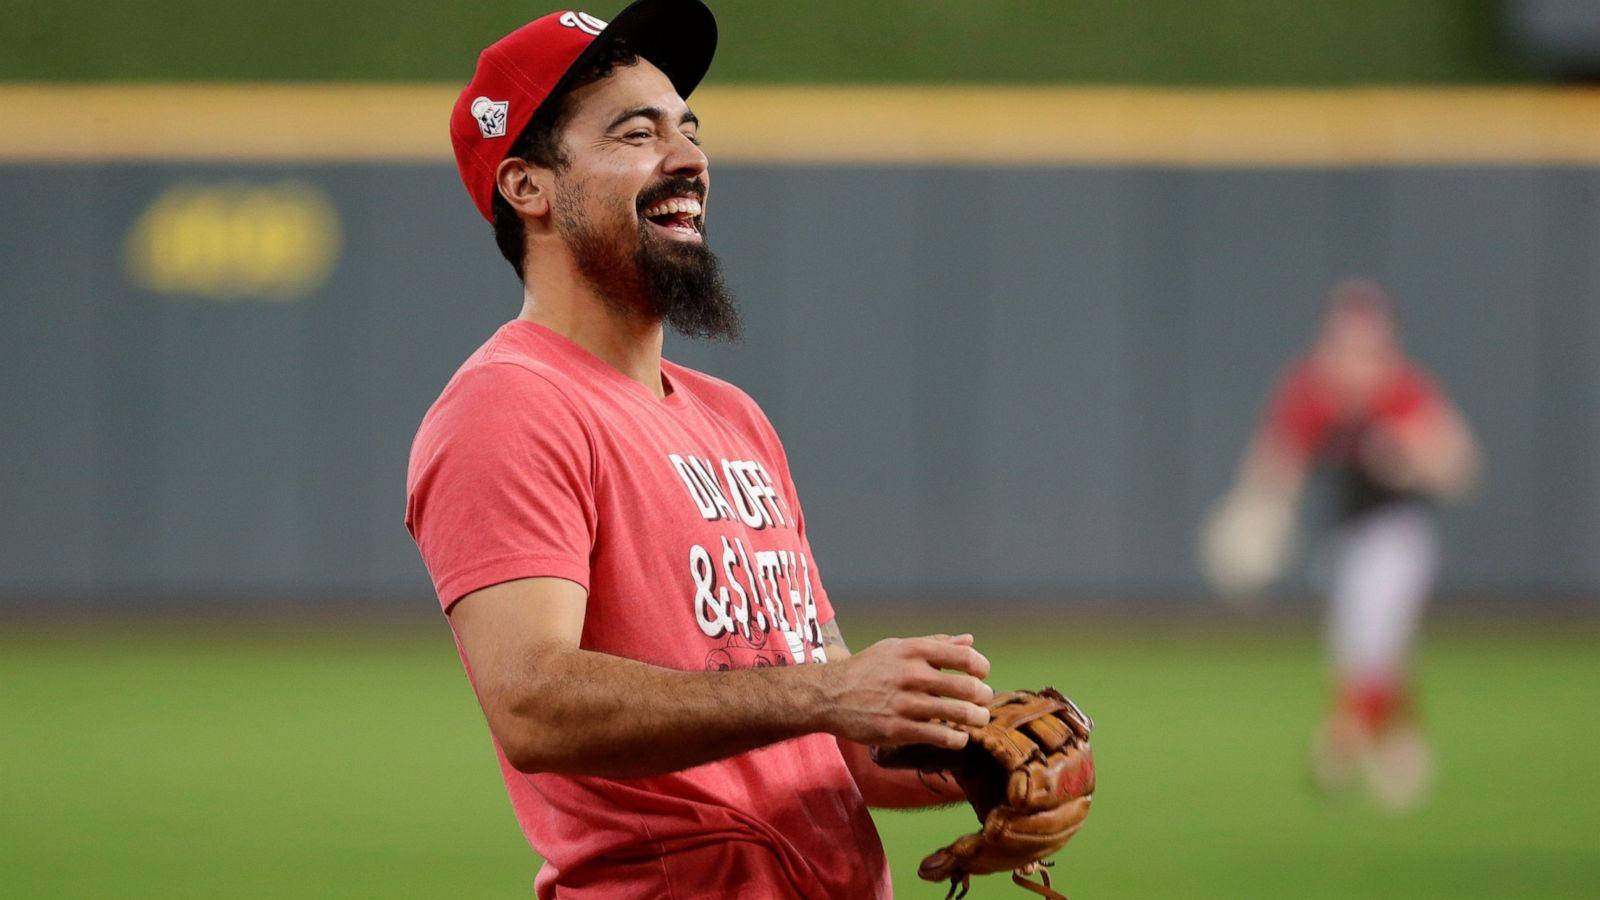 Anthony Rendon Laughing In Red Outfit